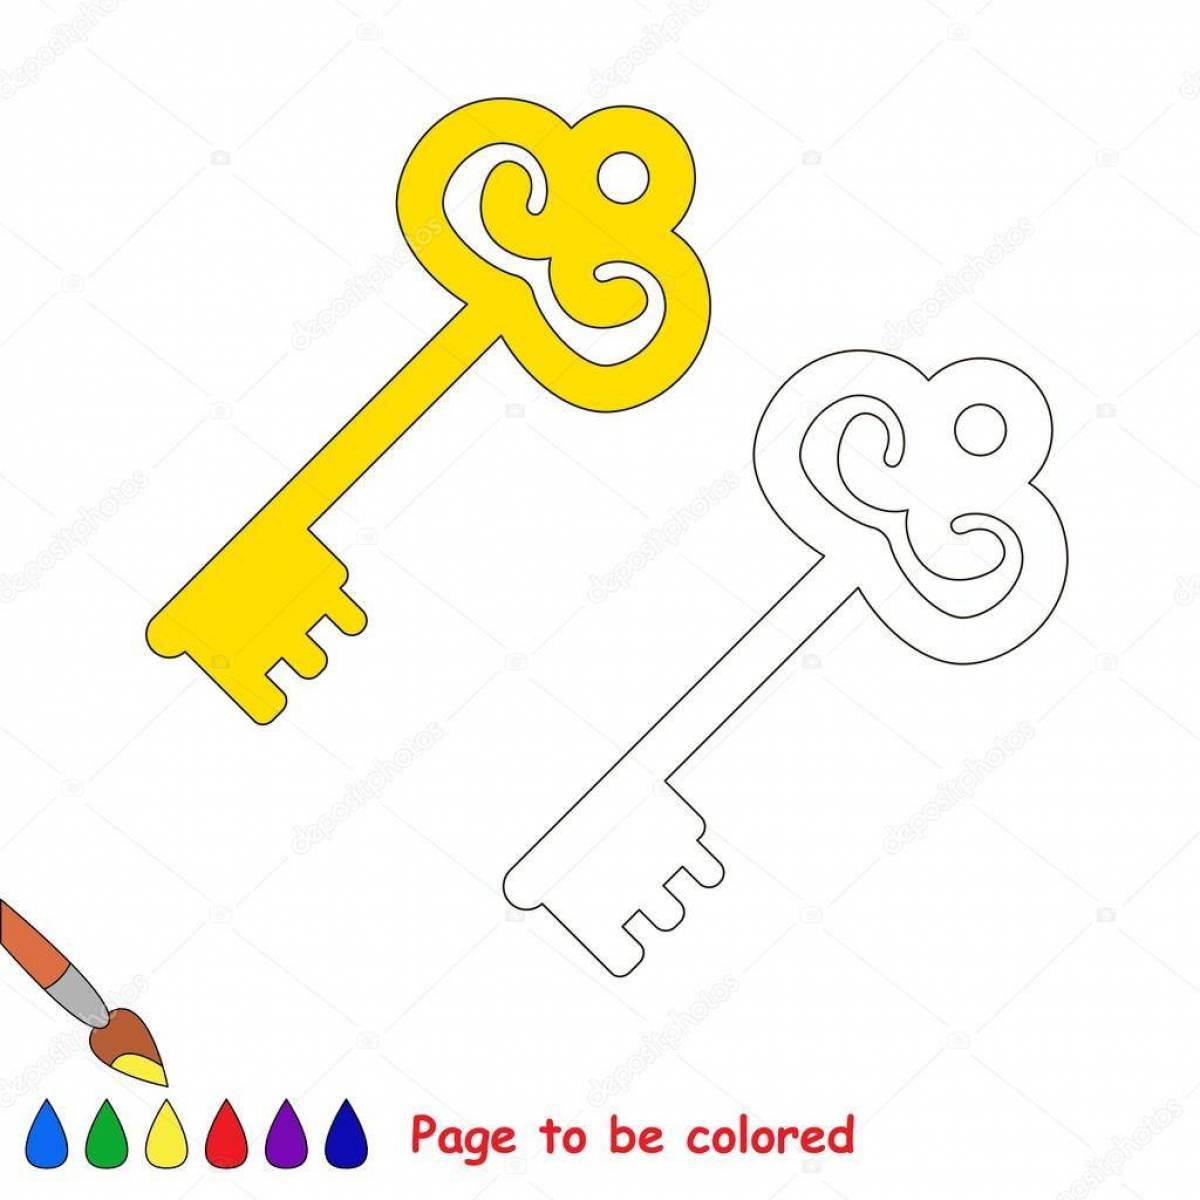 Great golden key coloring book